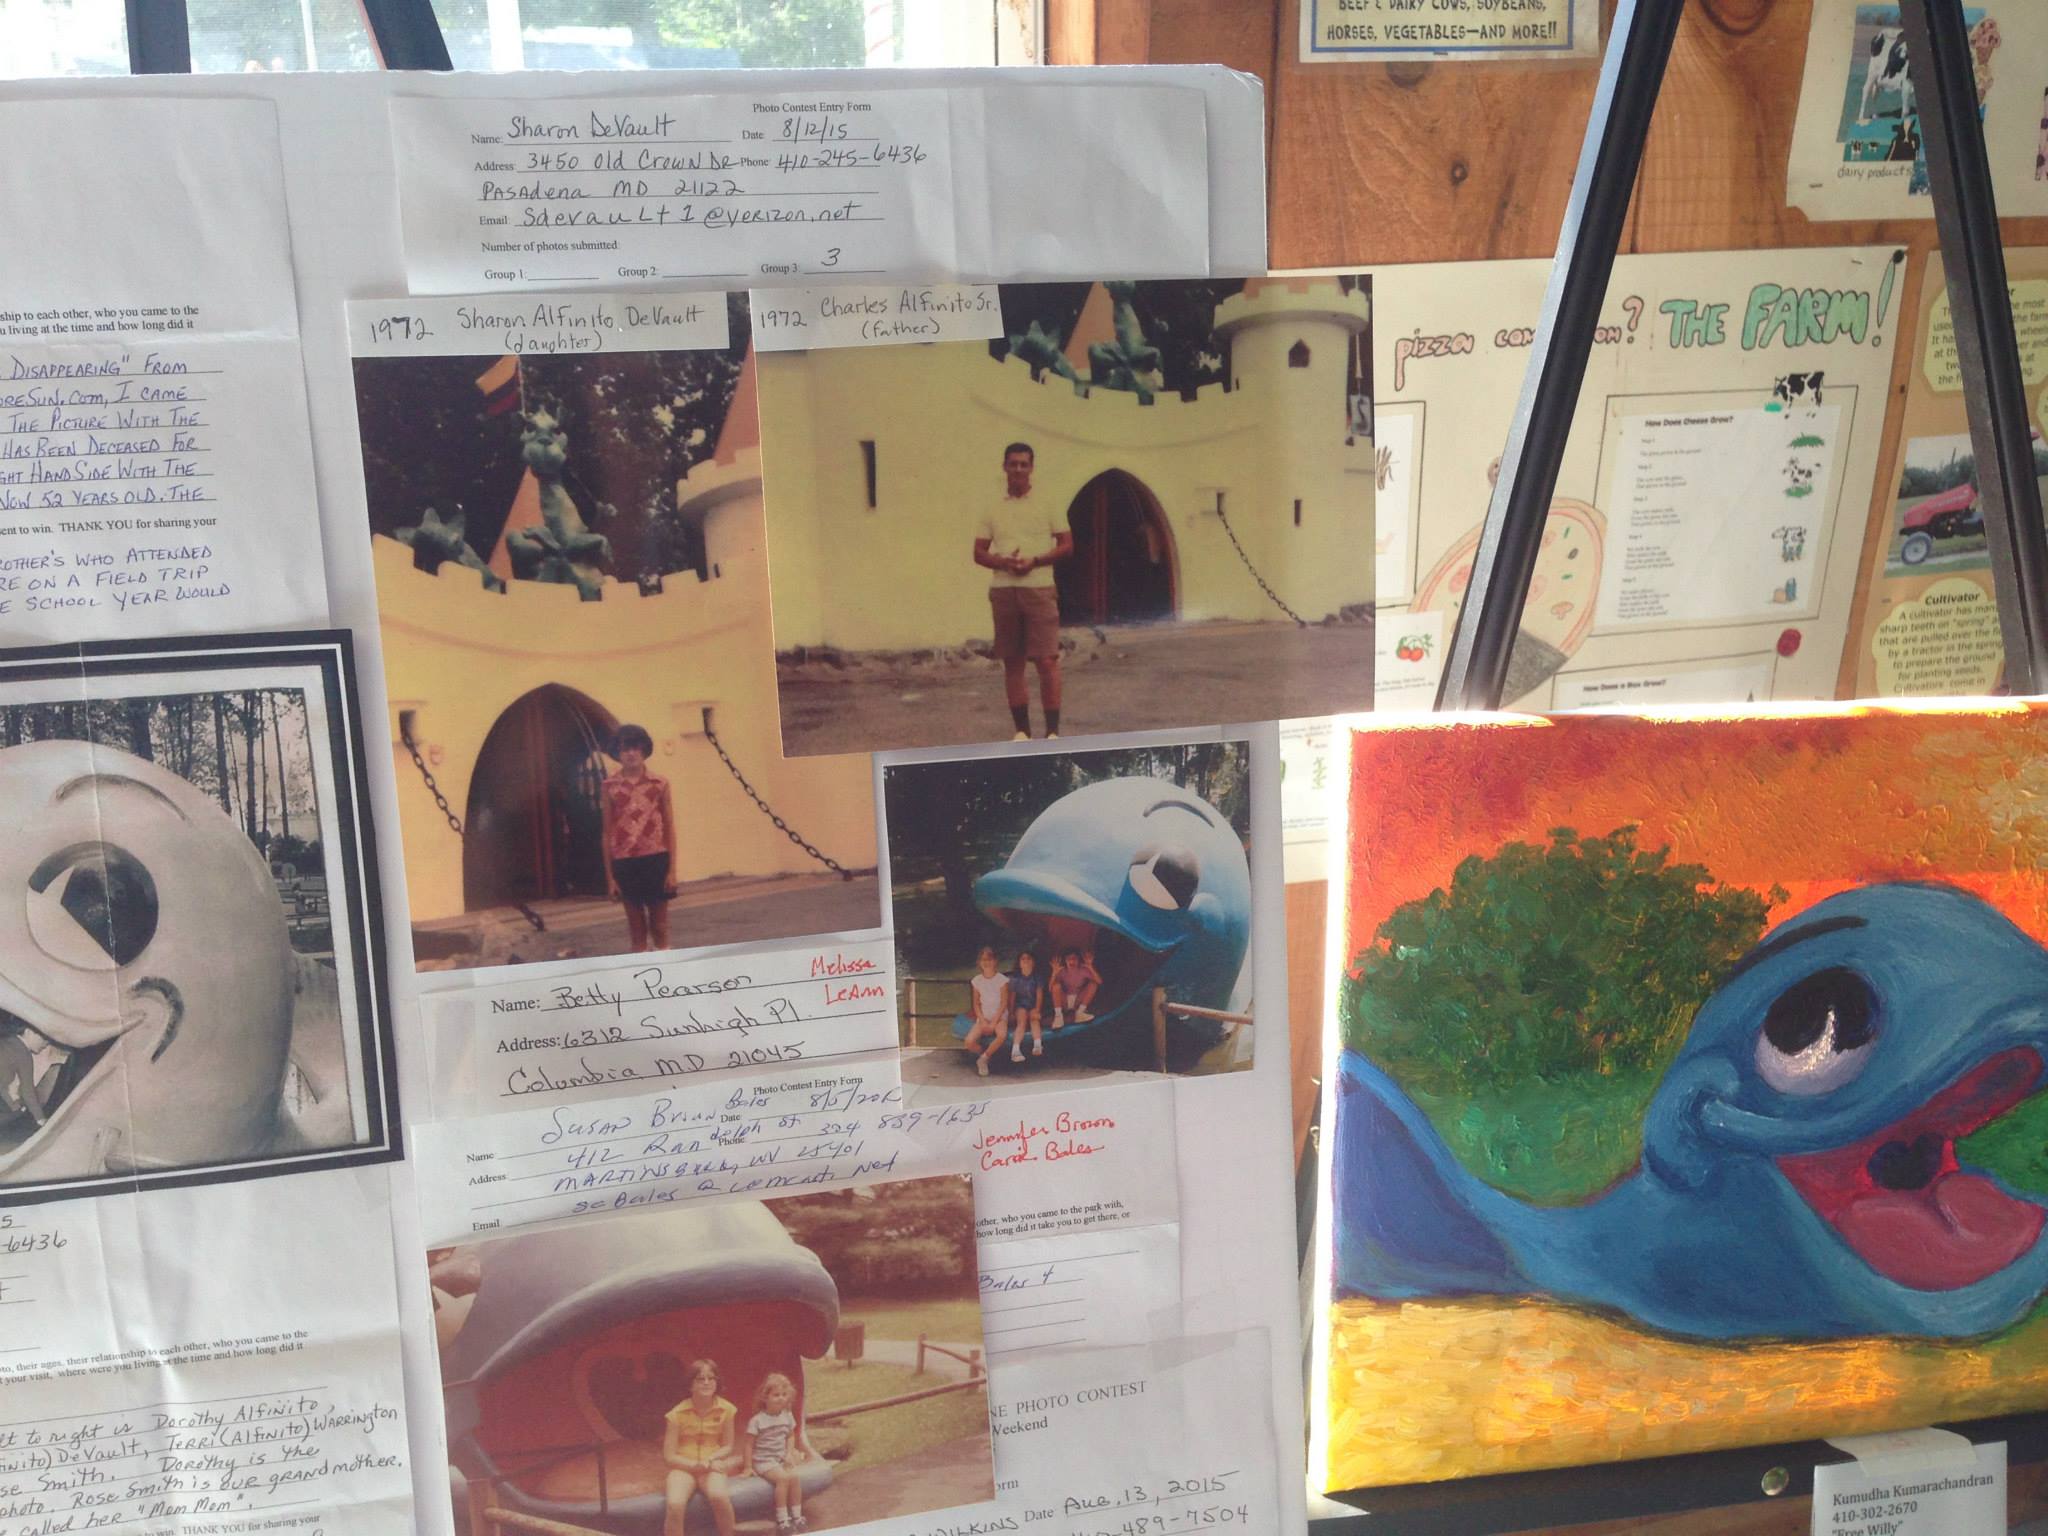 Posters showing images from the Enchanted Forest at Clark's Elioak Farm